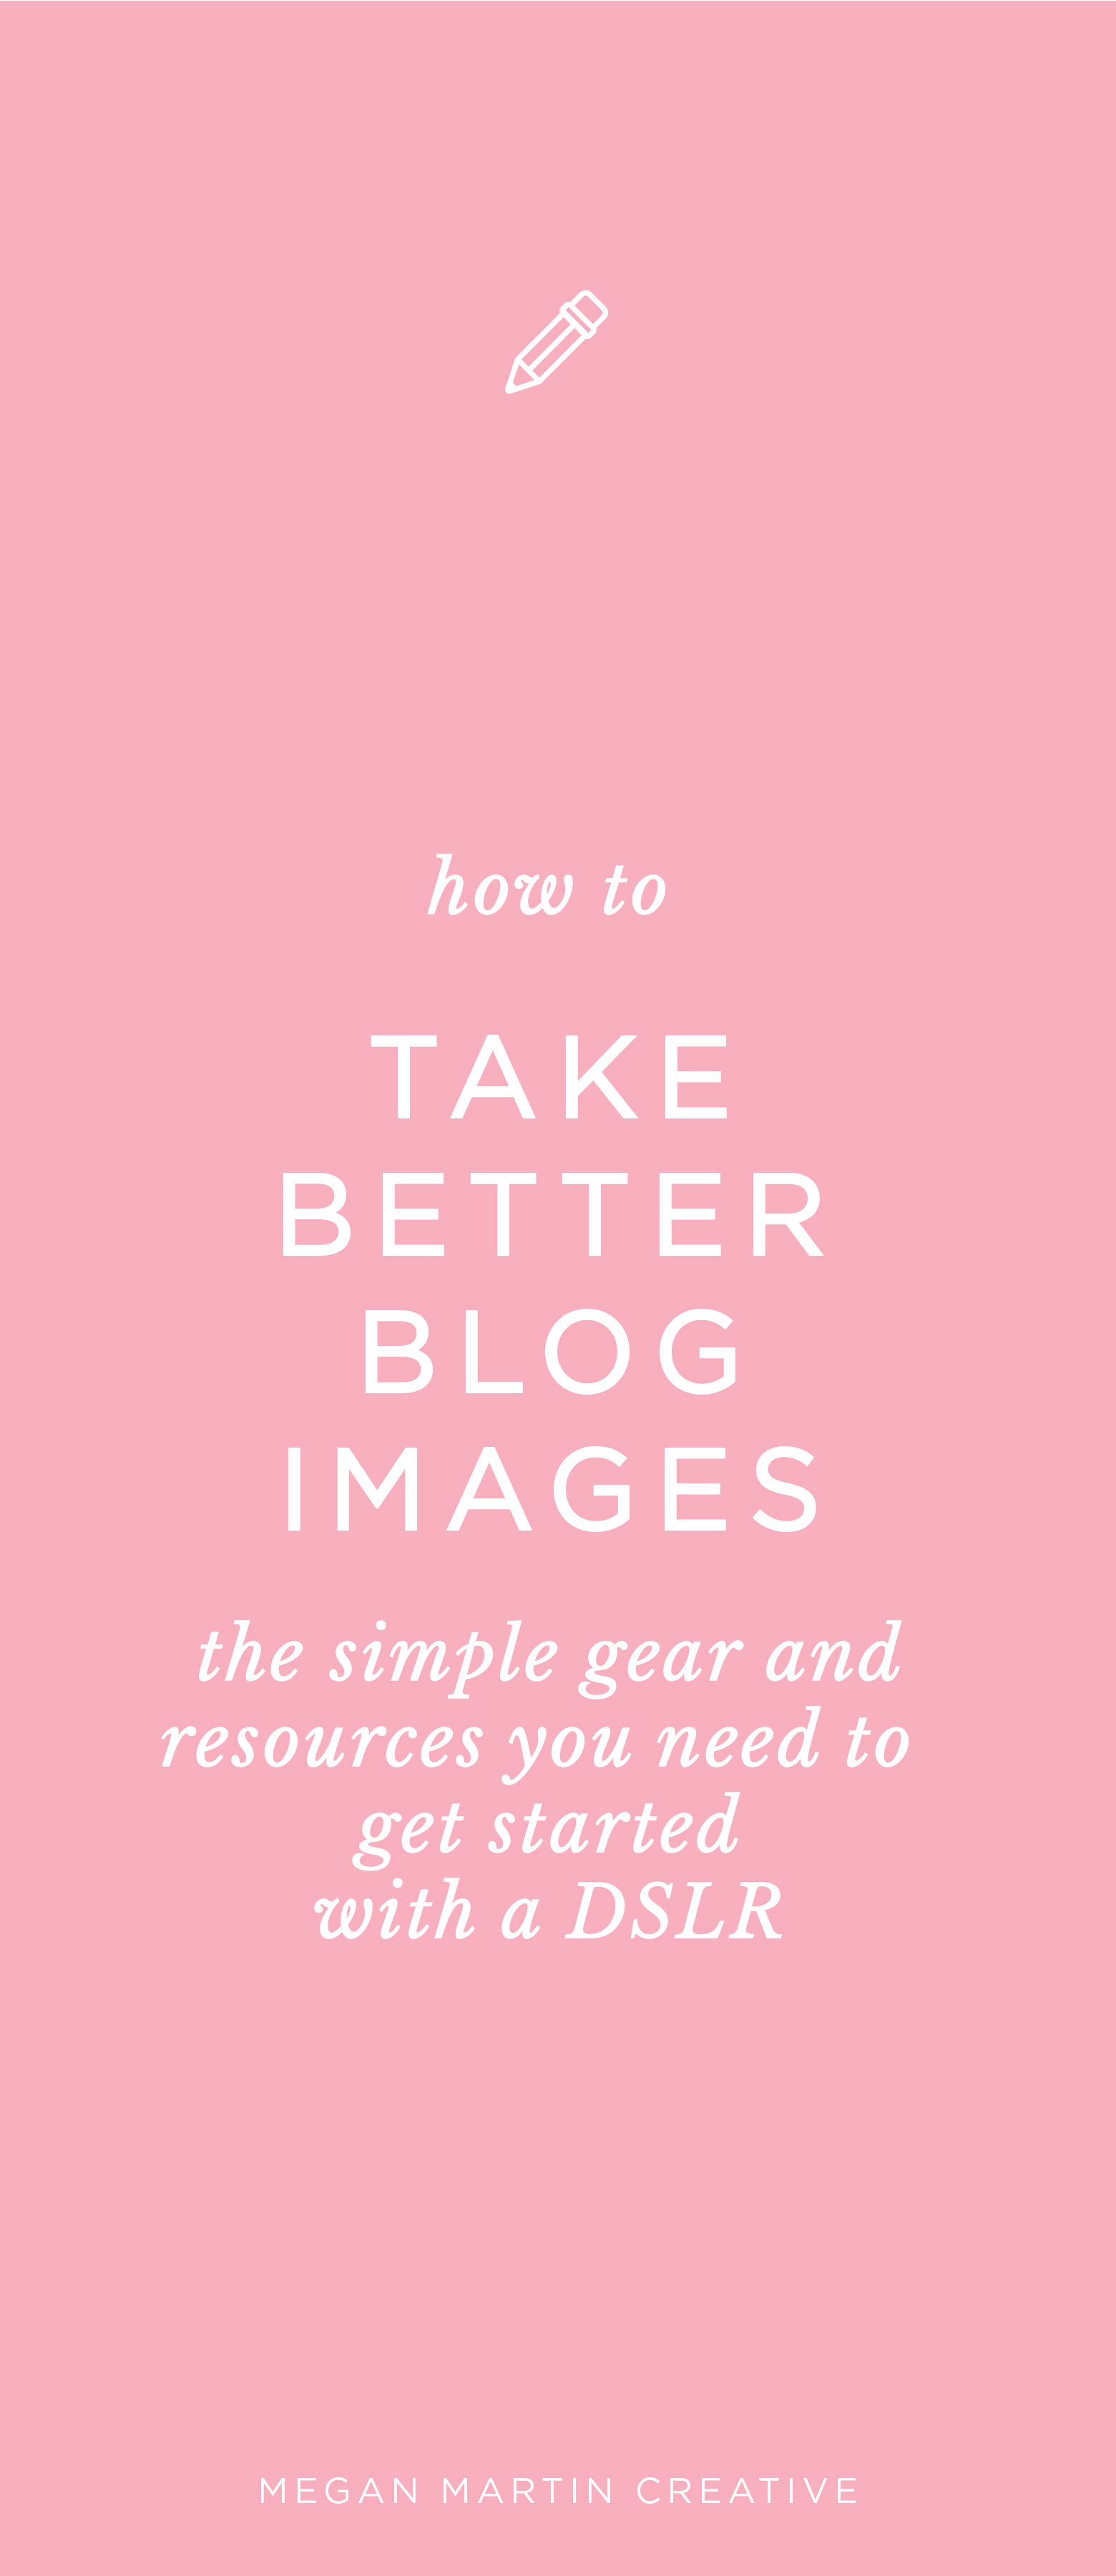 how to take better images for your blog on Megan Martin Creative, entry level DSLR, how to shoot in manual mode, how to edit with Lightroom, blogging tips, brand, branding, 35mm lens, 50mm lens, nikon d3200, light and airy photos